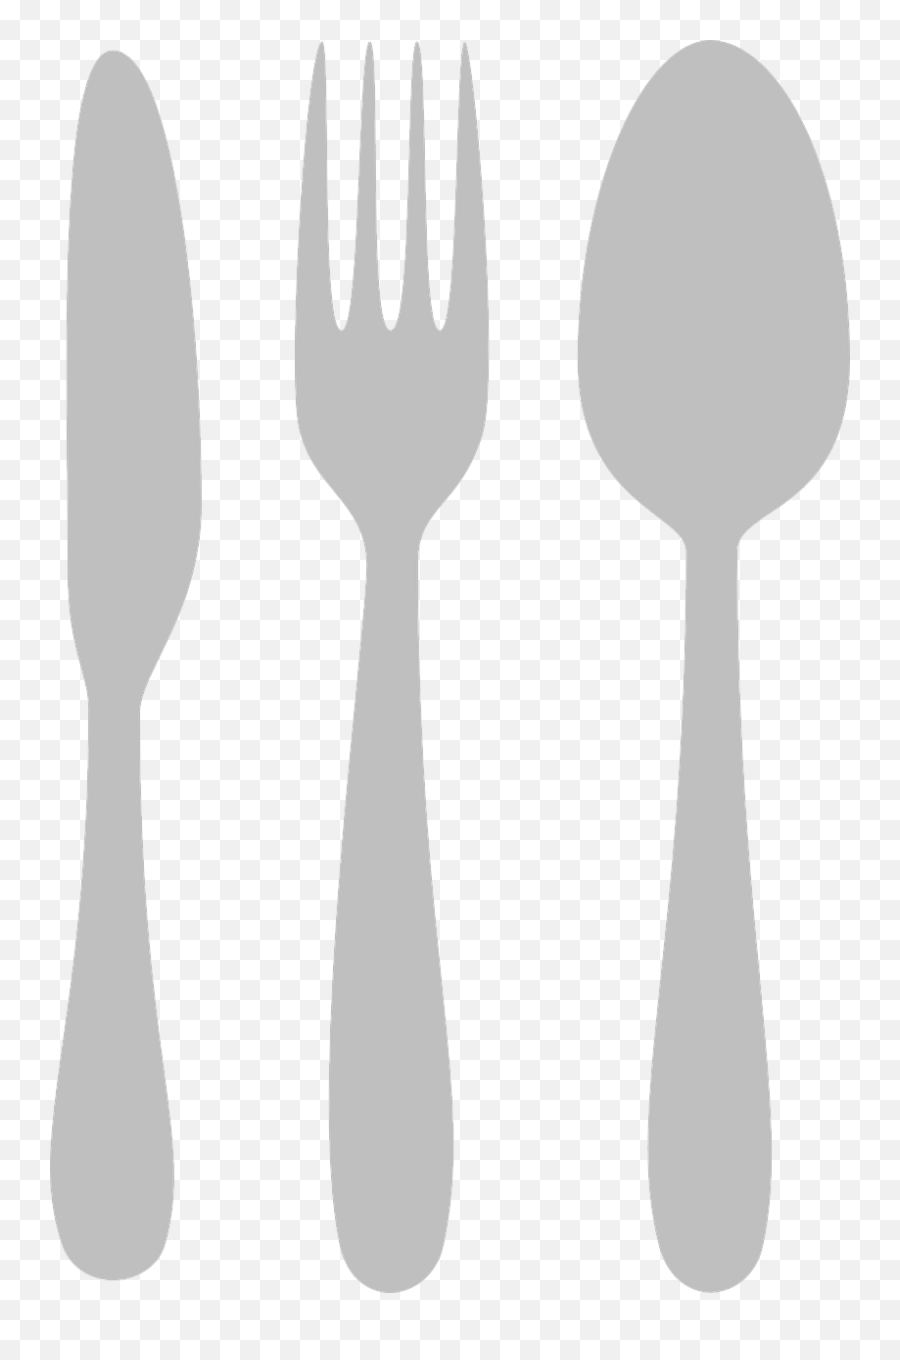 Fork Clipart Silverware Picture 2722466 Fork Clipart - Clip Art Silverware Emoji,Fork Clipart